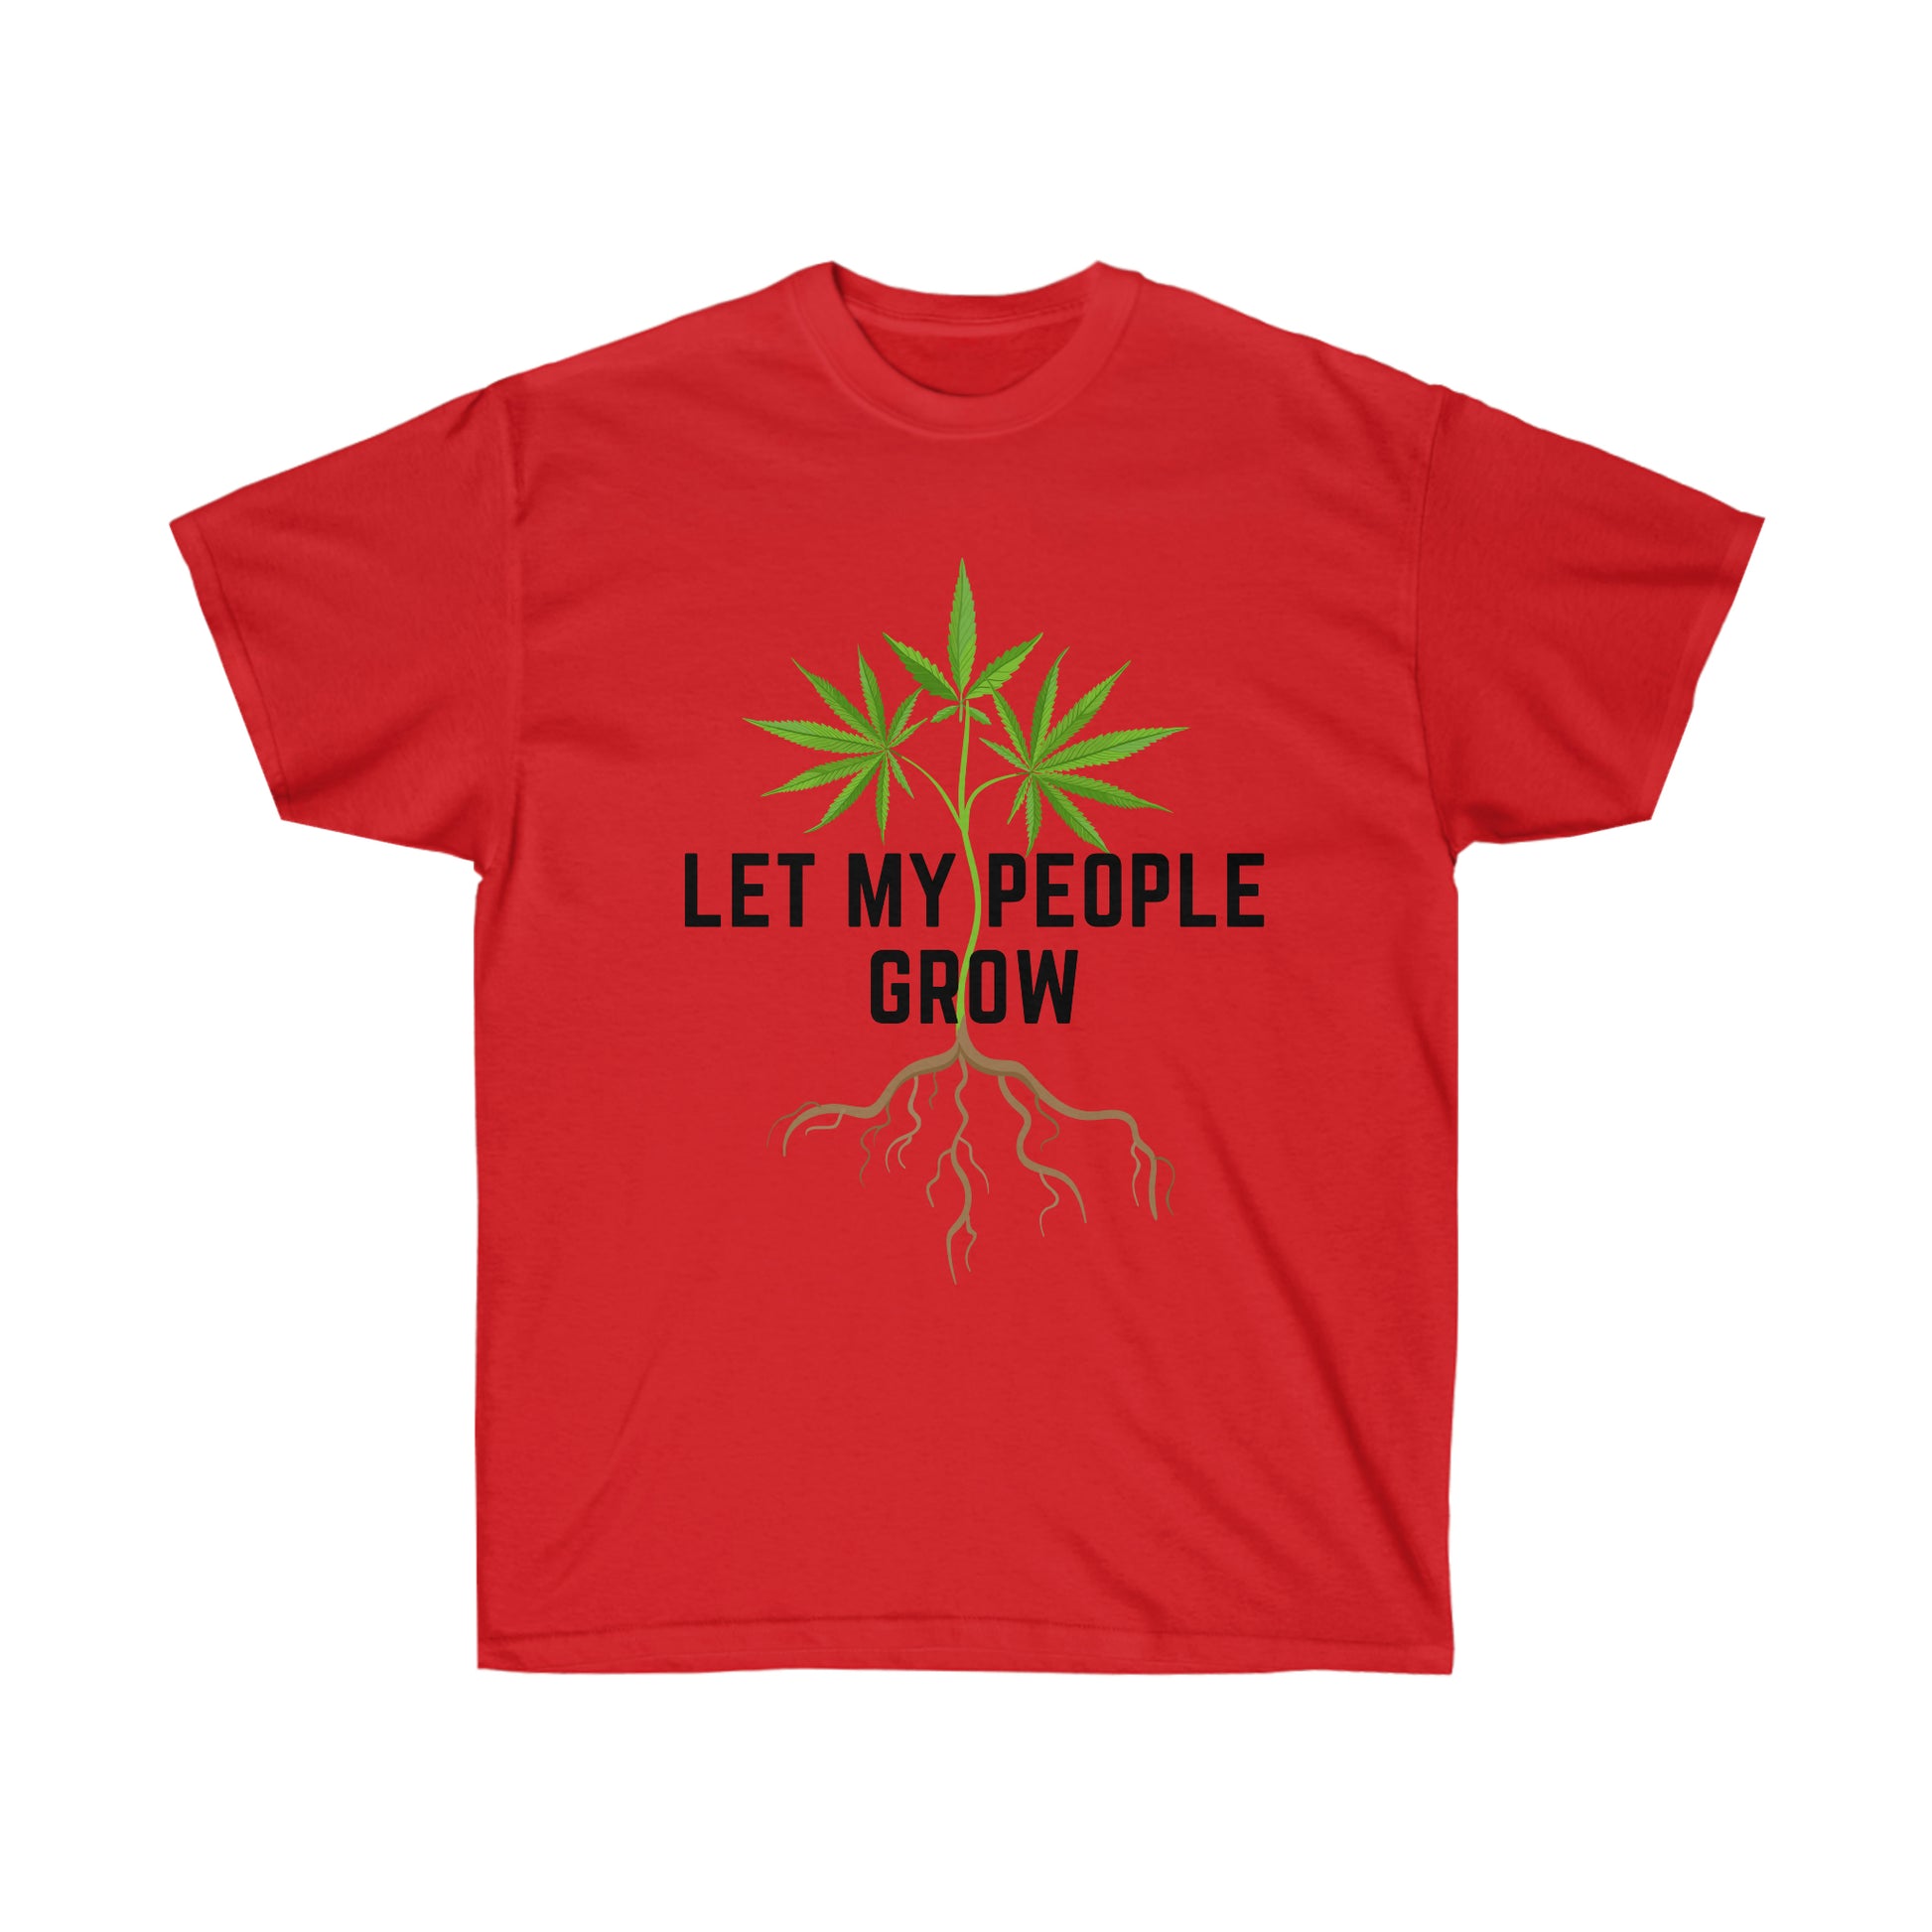 A Let My People Grow T-Shirt that says let my people grow.